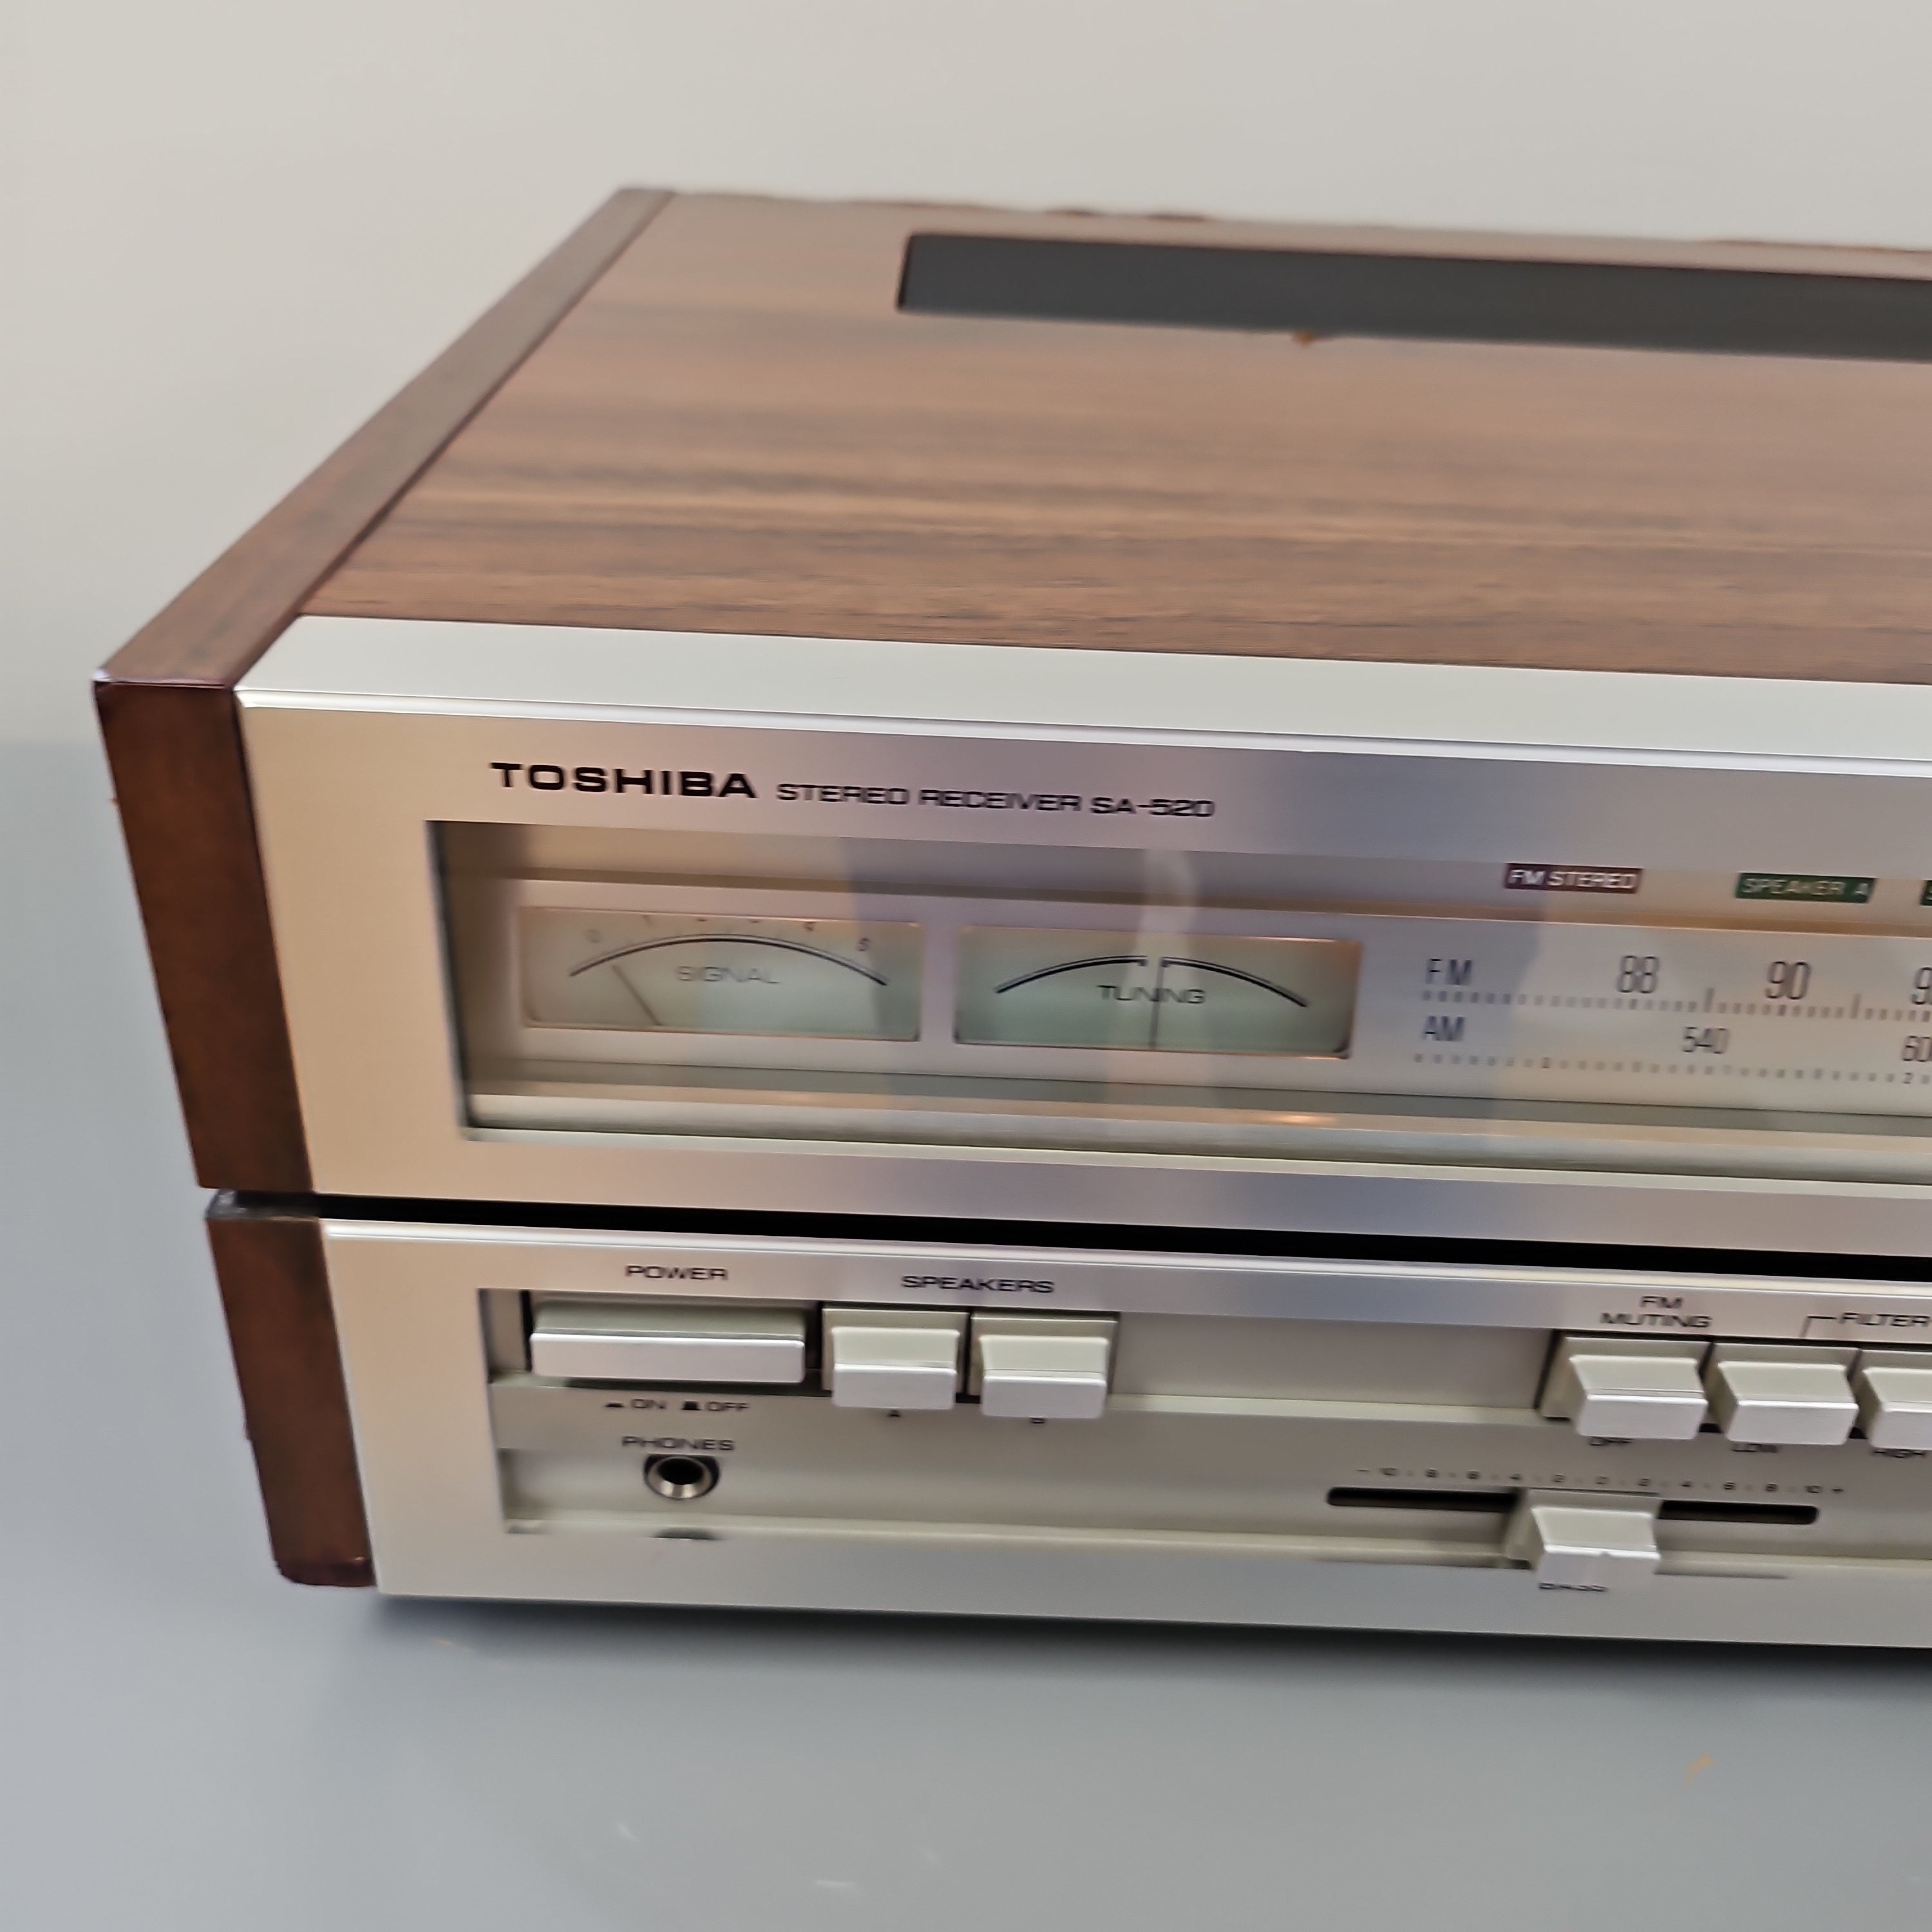 Toshiba SA-520 Stereo Receiver * $100 Flat Ship CONUS Only – The Turntable  Store